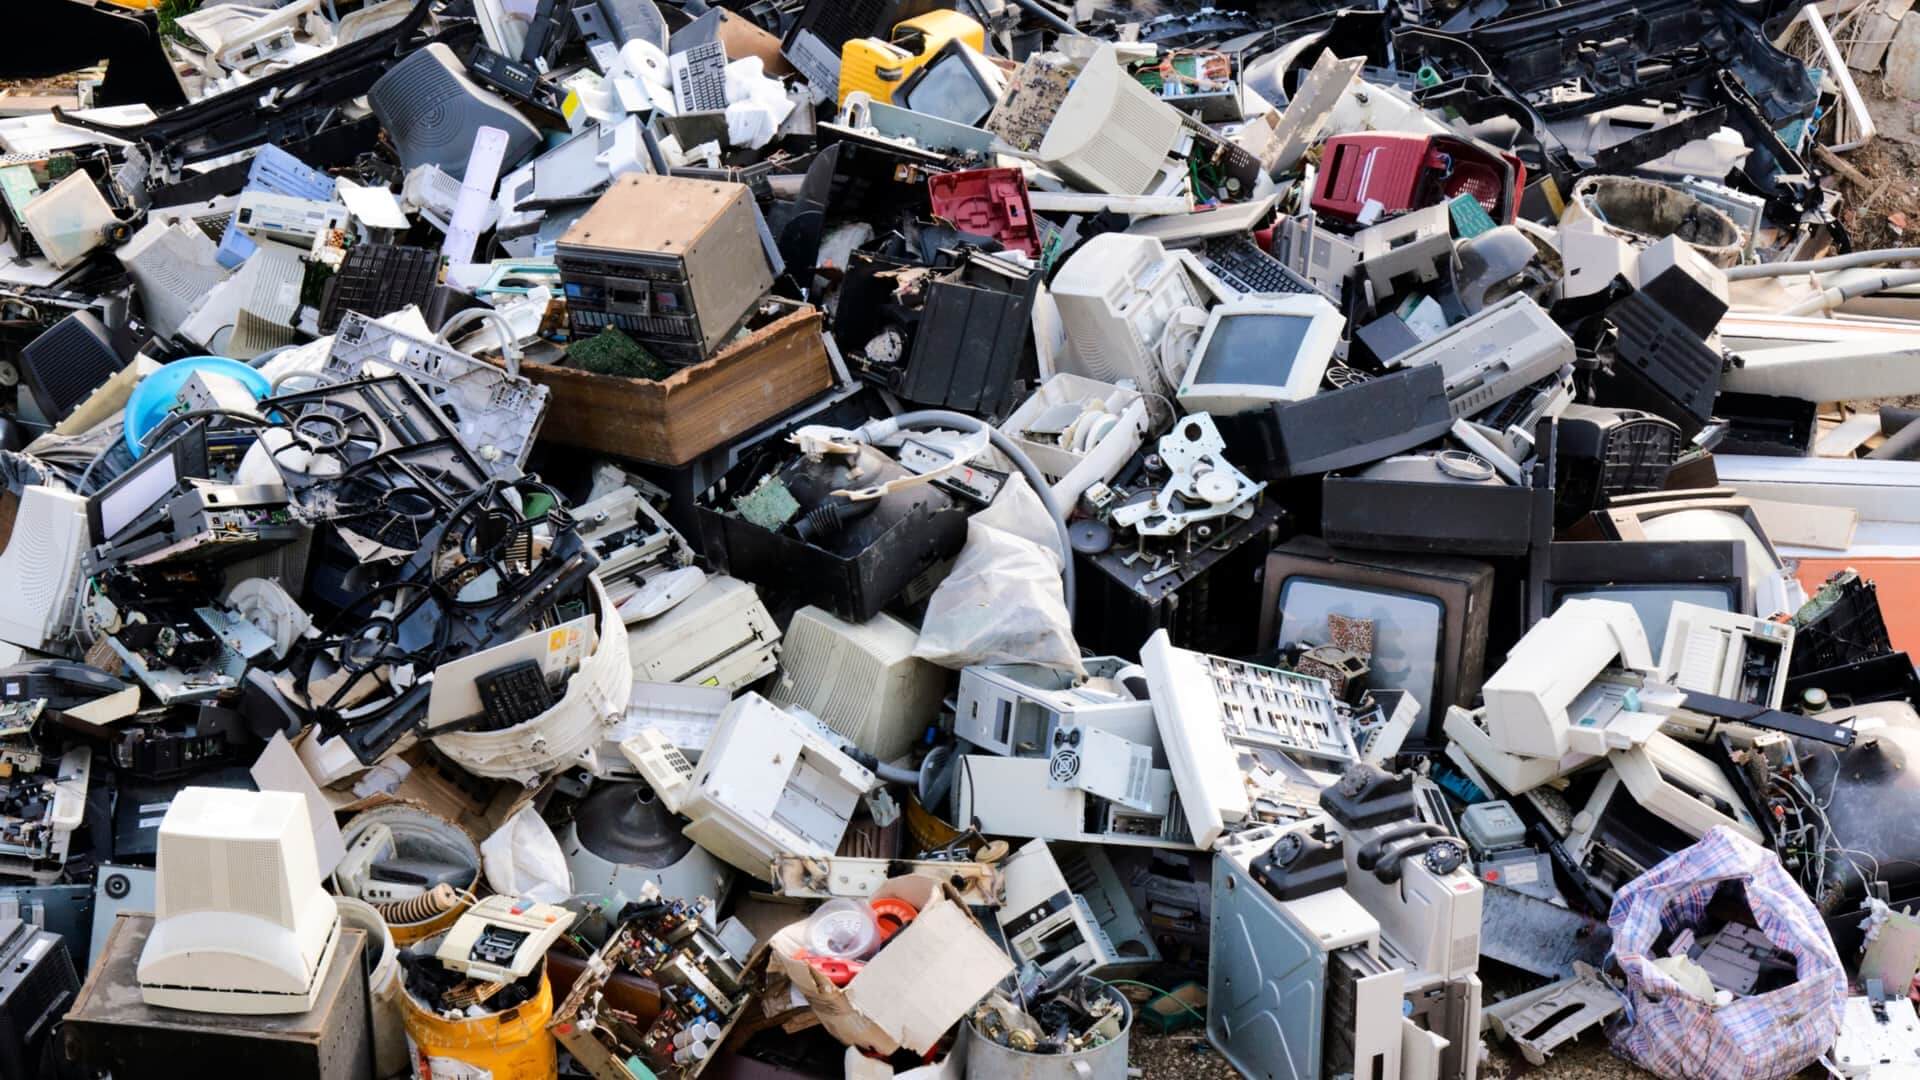 Is There a Way Out of the Global E-Waste Crisis?